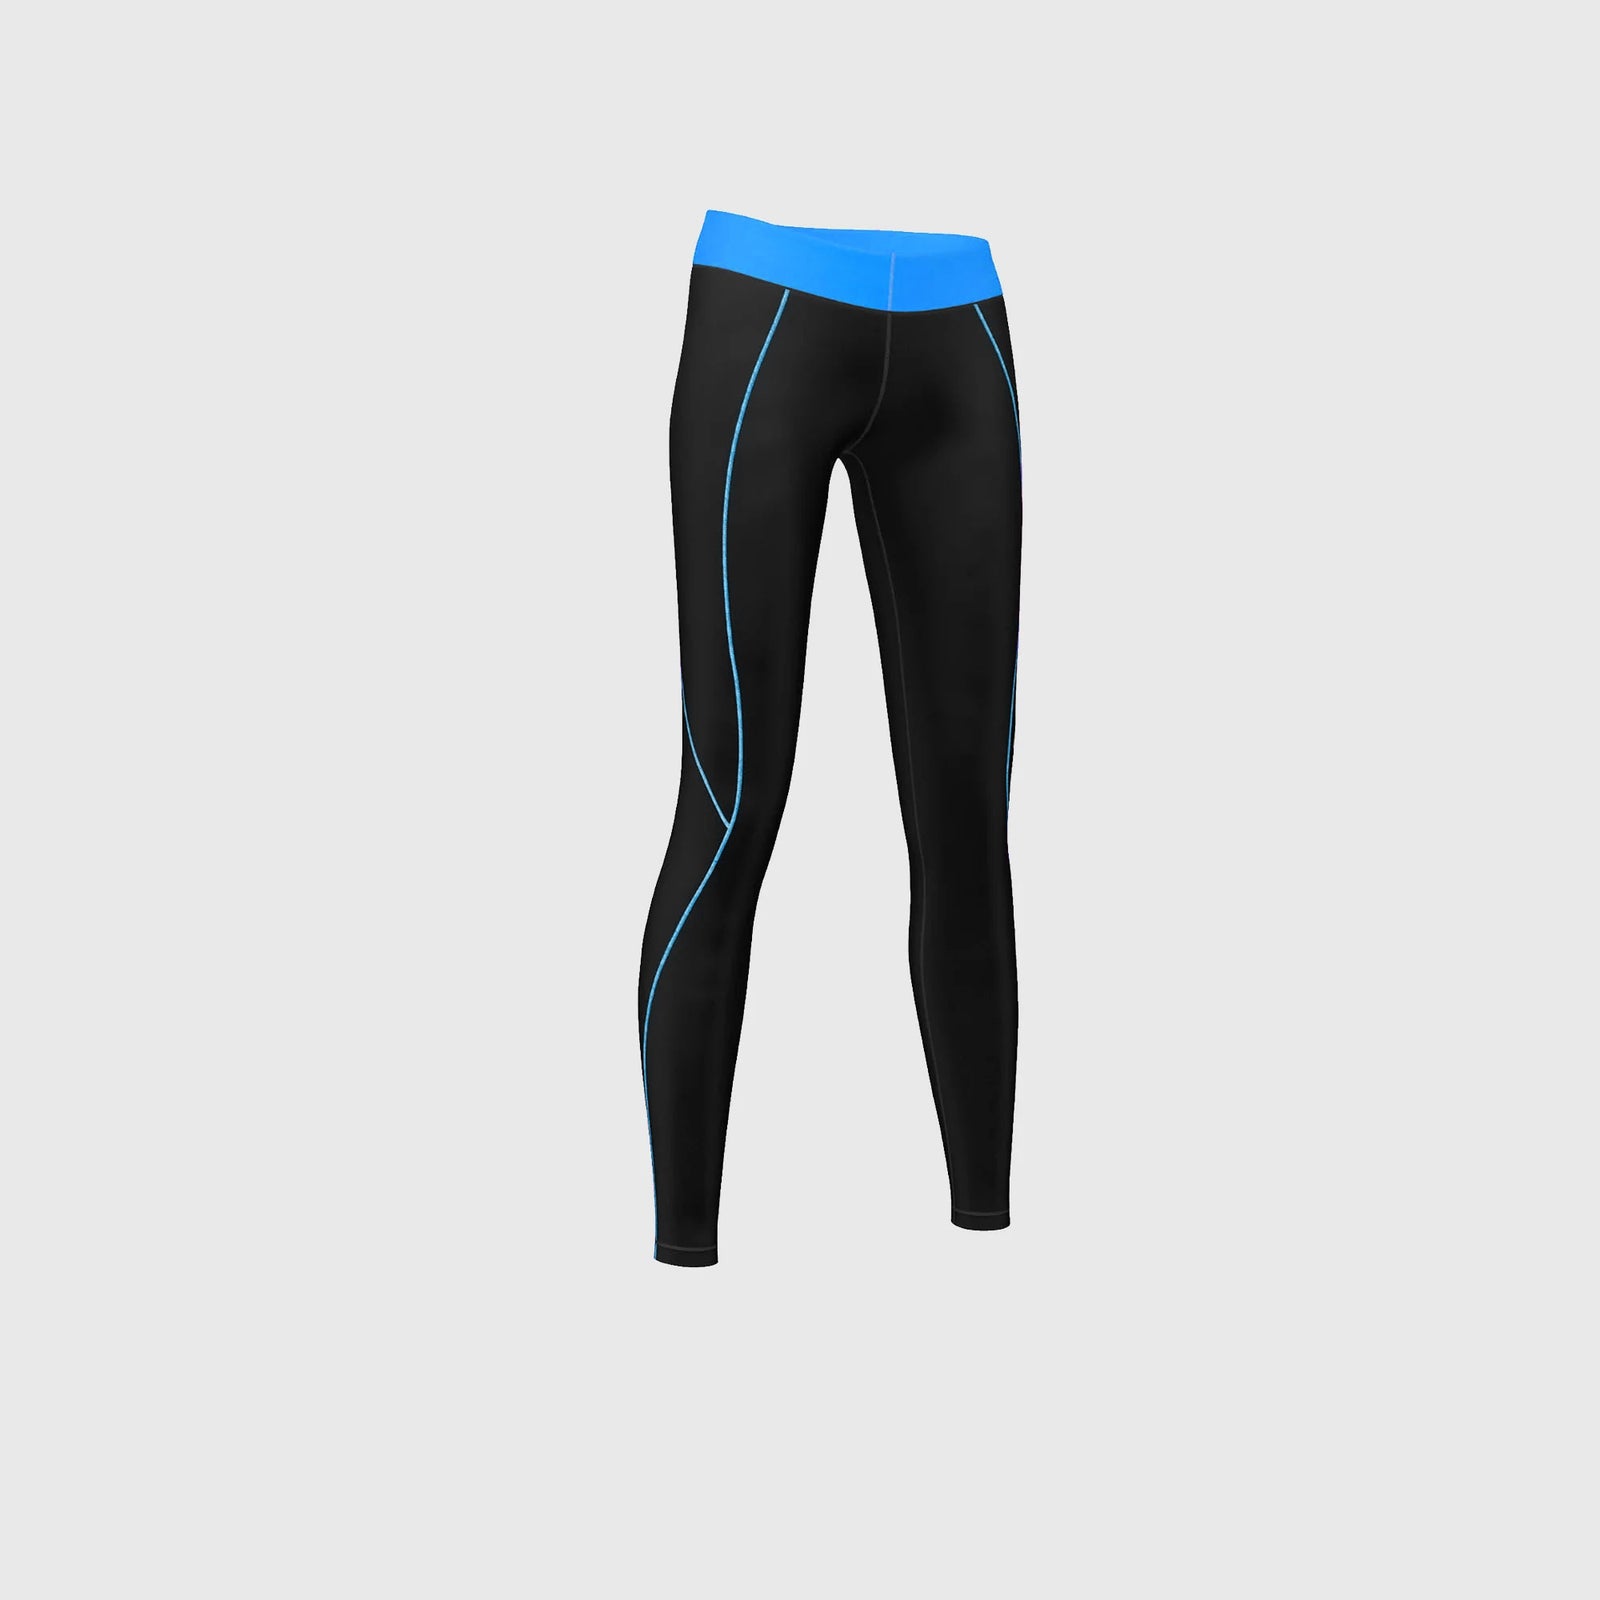 High Waist Push Up Legging Tiktok For Women Tummy Control Sport Pants For  Gym, Fitness, Running 211215 From Luo02, $10.02 | DHgate.Com